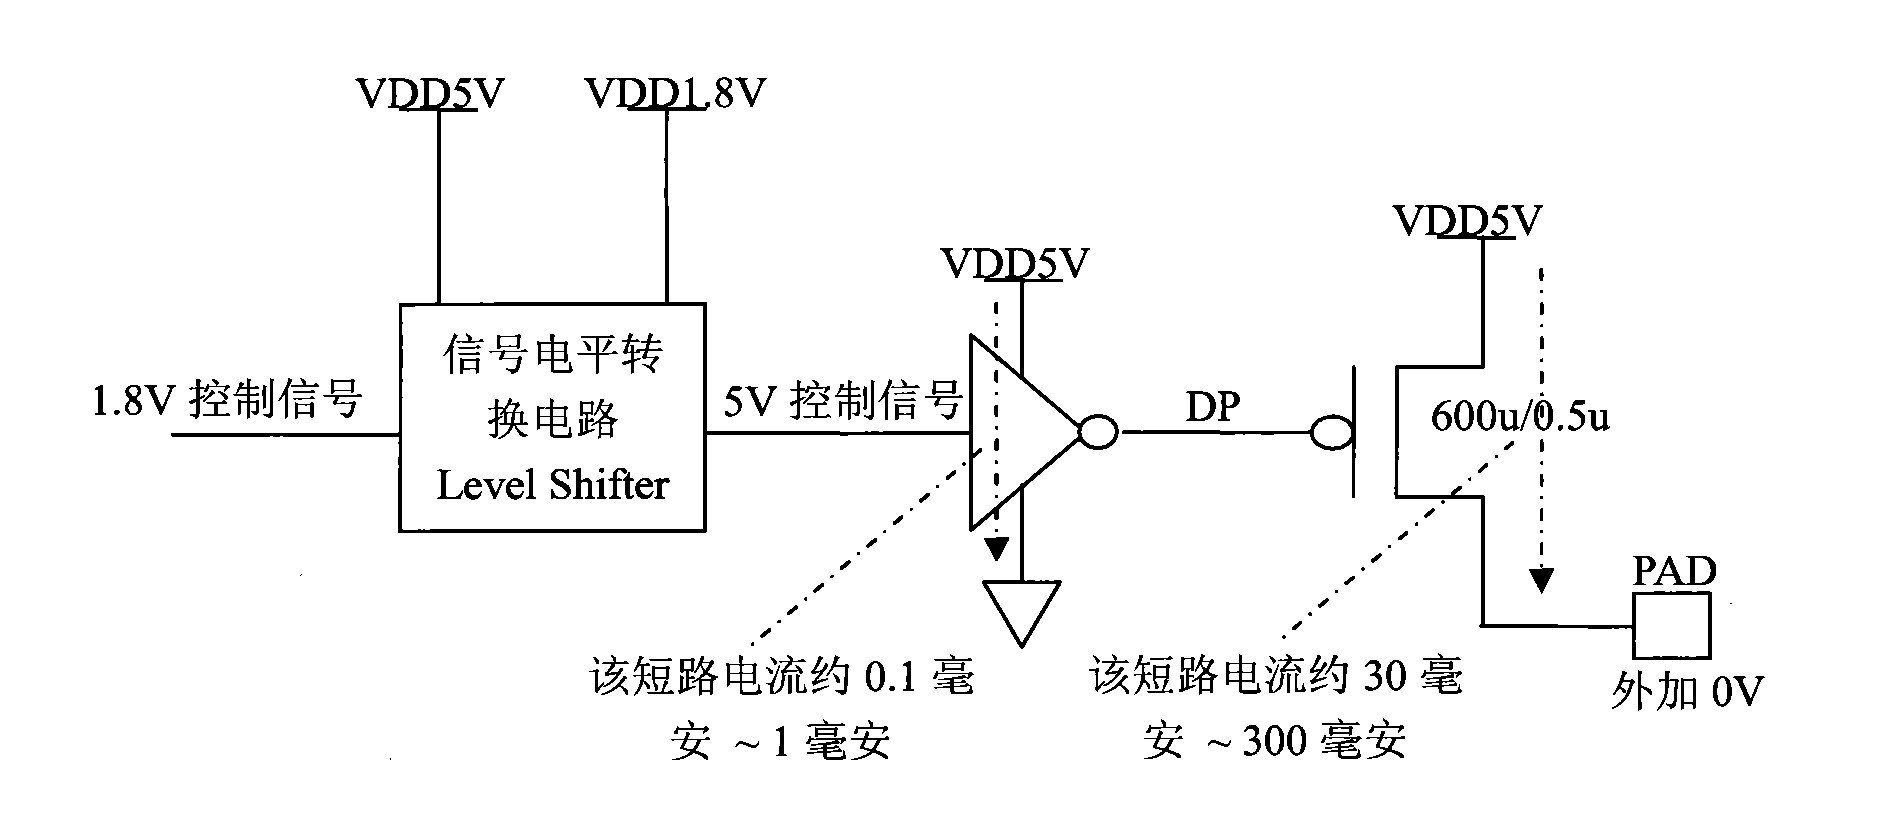 Hybrid latch applied to multi-power supply system on chip